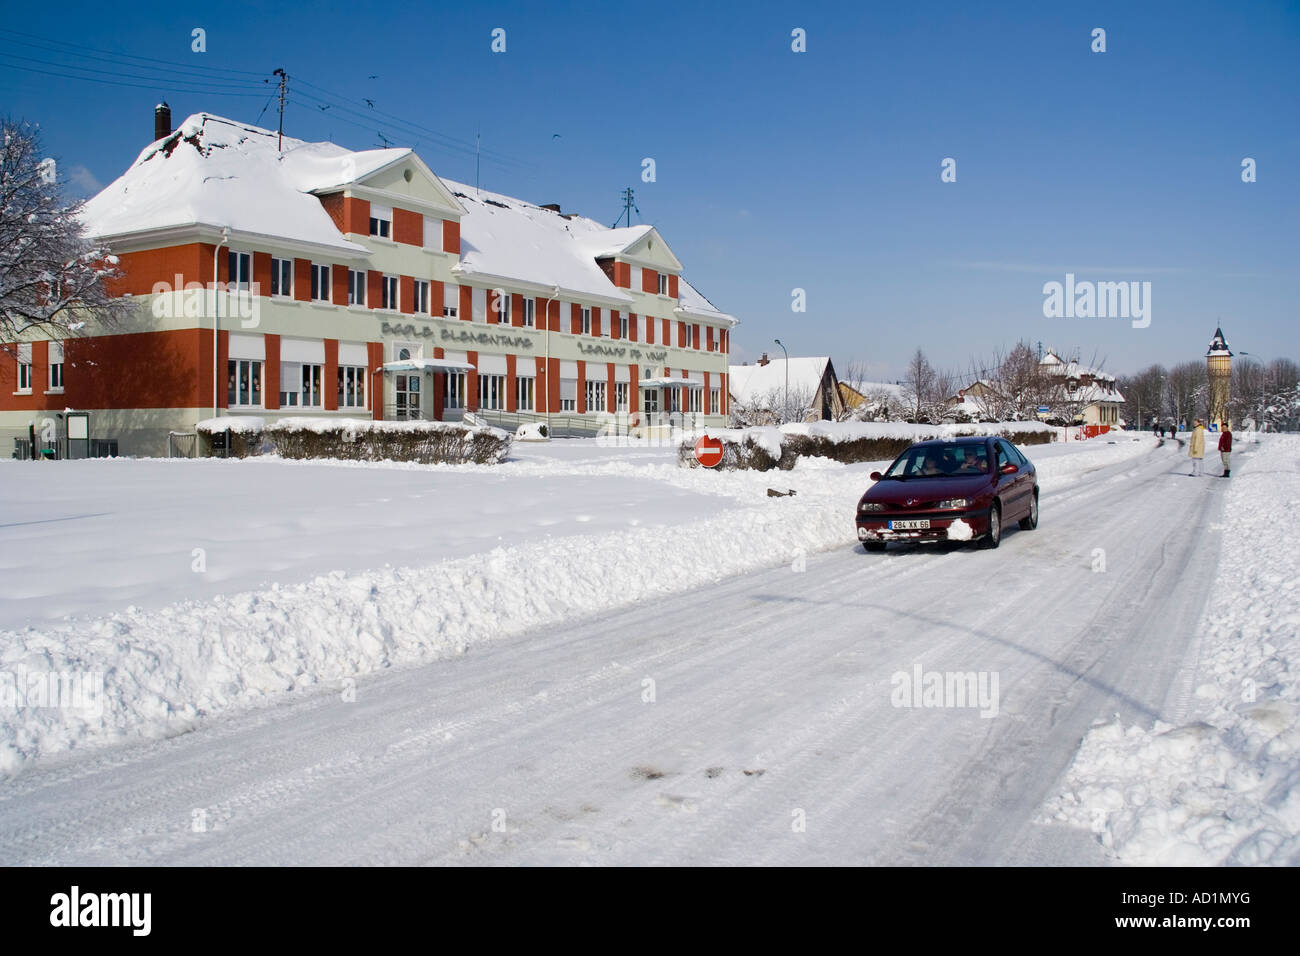 Carefully driving past school after snowfall, Alsace, France Stock Photo